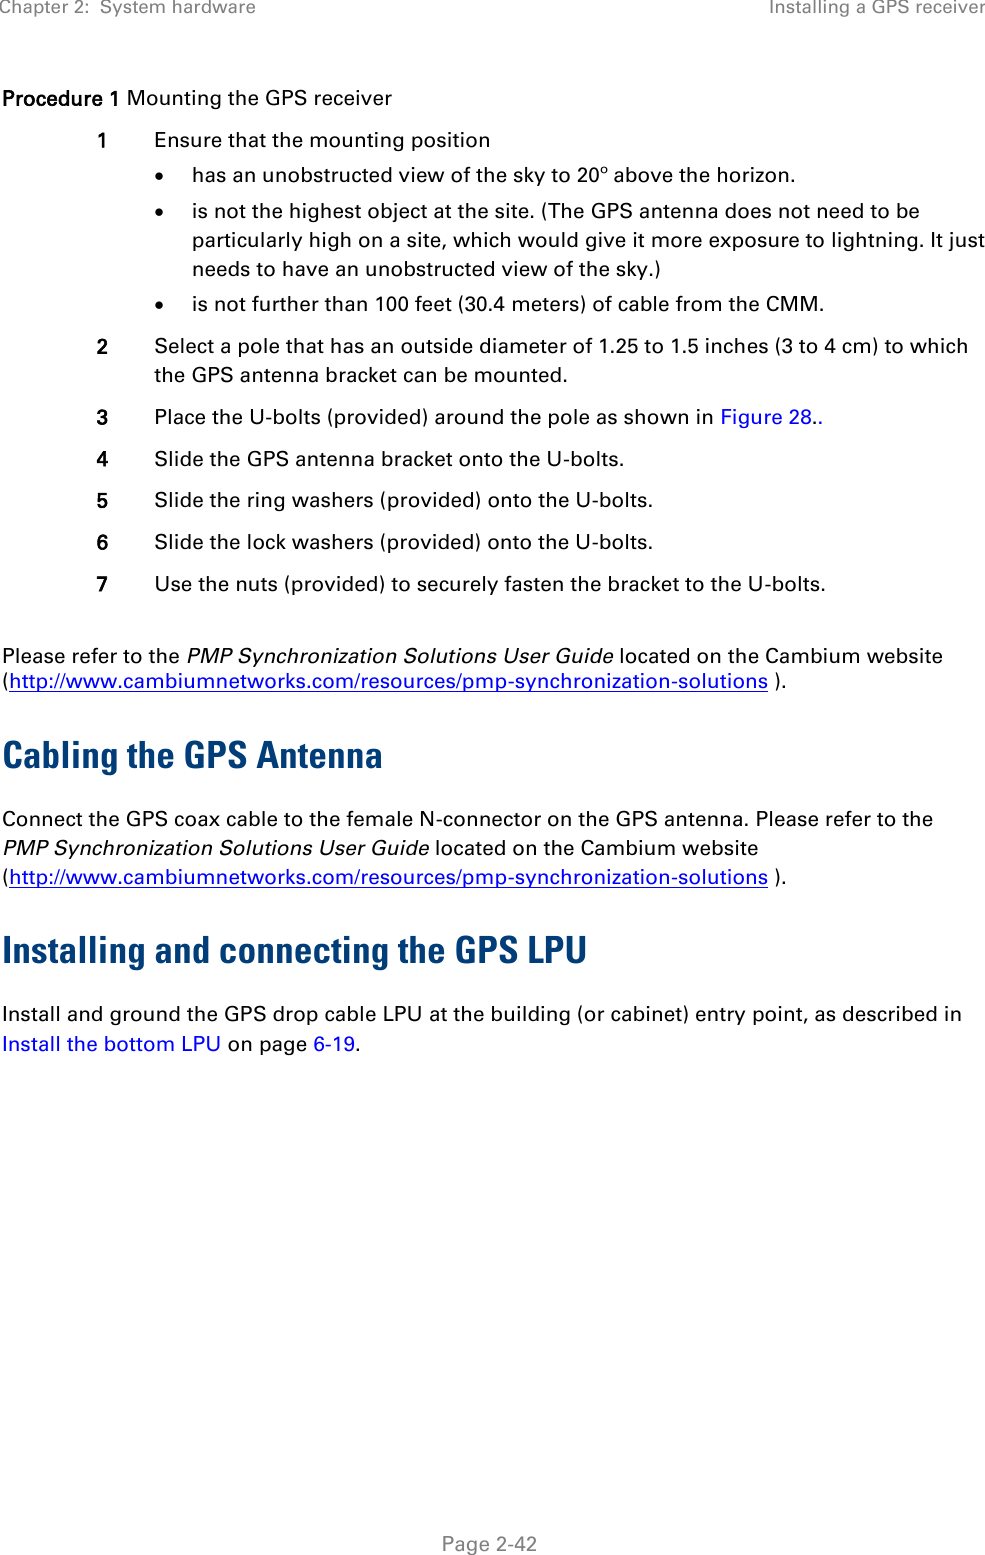 Chapter 2:  System hardware Installing a GPS receiver   Page 2-42 Procedure 1 Mounting the GPS receiver 1 Ensure that the mounting position  has an unobstructed view of the sky to 20º above the horizon.  is not the highest object at the site. (The GPS antenna does not need to be particularly high on a site, which would give it more exposure to lightning. It just needs to have an unobstructed view of the sky.)  is not further than 100 feet (30.4 meters) of cable from the CMM. 2 Select a pole that has an outside diameter of 1.25 to 1.5 inches (3 to 4 cm) to which the GPS antenna bracket can be mounted. 3 Place the U-bolts (provided) around the pole as shown in Figure 28.. 4 Slide the GPS antenna bracket onto the U-bolts. 5 Slide the ring washers (provided) onto the U-bolts. 6 Slide the lock washers (provided) onto the U-bolts. 7 Use the nuts (provided) to securely fasten the bracket to the U-bolts.  Please refer to the PMP Synchronization Solutions User Guide located on the Cambium website (http://www.cambiumnetworks.com/resources/pmp-synchronization-solutions ). Cabling the GPS Antenna Connect the GPS coax cable to the female N-connector on the GPS antenna. Please refer to the PMP Synchronization Solutions User Guide located on the Cambium website (http://www.cambiumnetworks.com/resources/pmp-synchronization-solutions ). Installing and connecting the GPS LPU Install and ground the GPS drop cable LPU at the building (or cabinet) entry point, as described in Install the bottom LPU on page 6-19.  